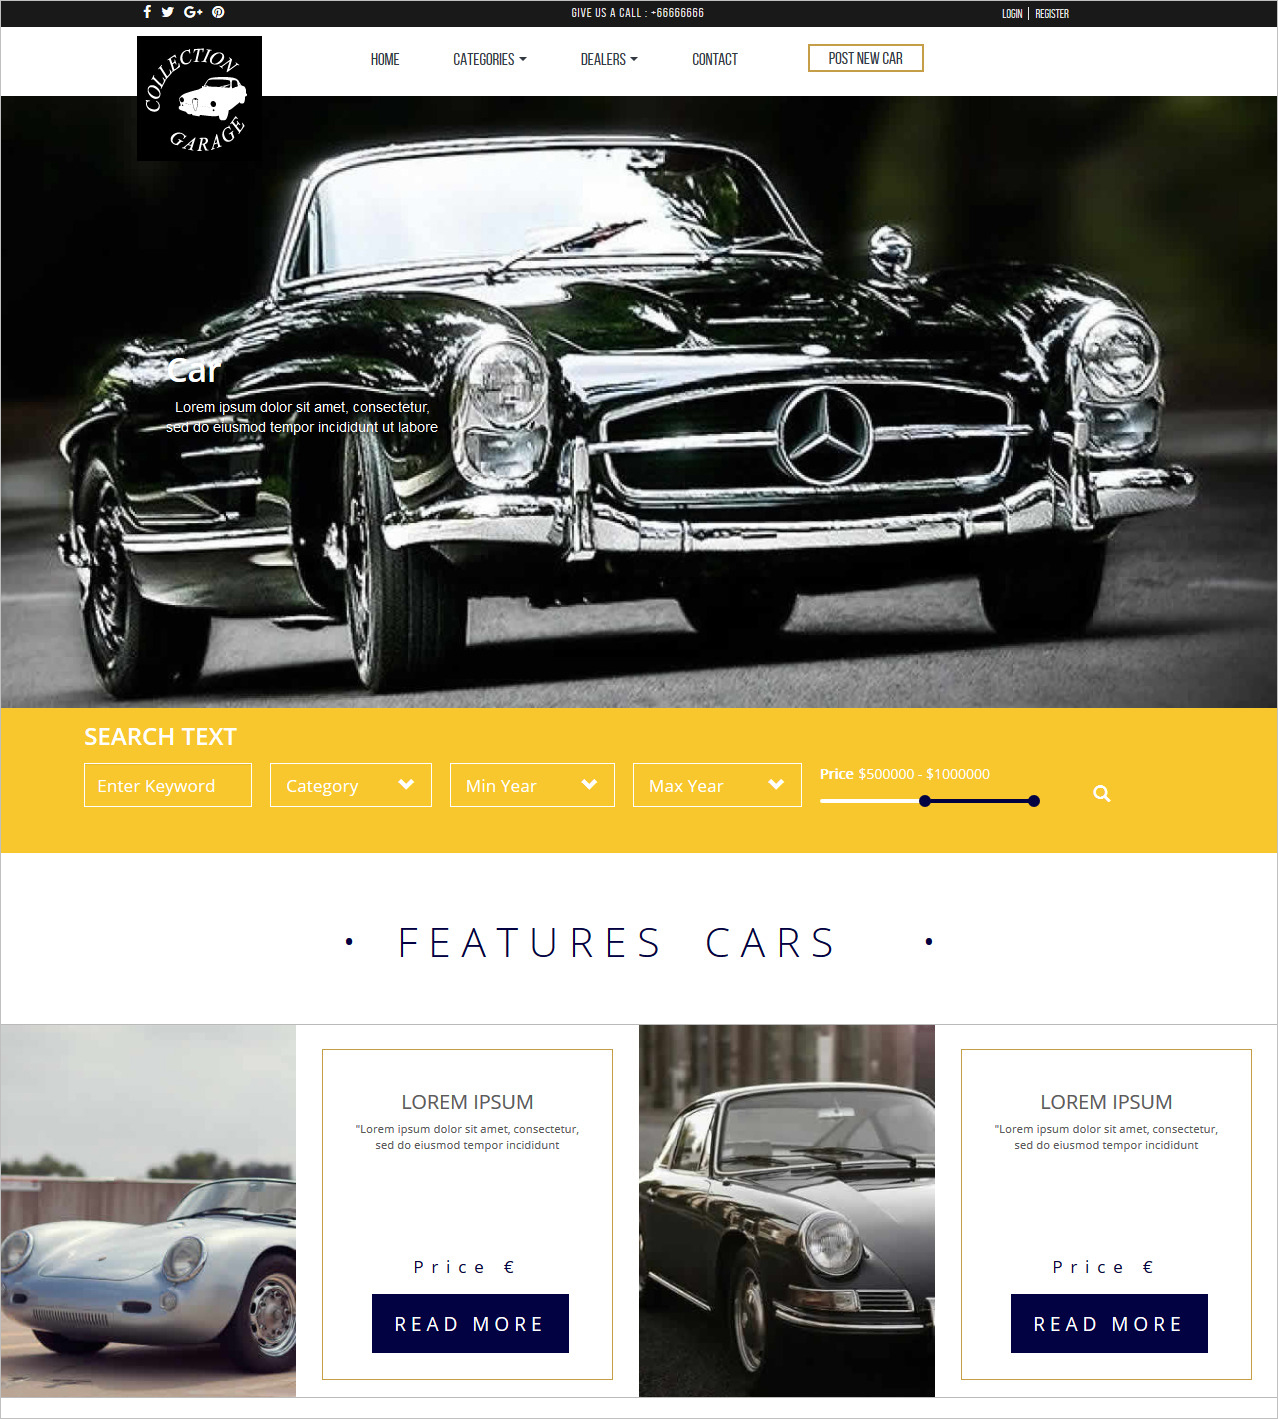 20 Best Free Car Website Templates And Themes For Car Sales Dealers Rental Car Auto Repair And More